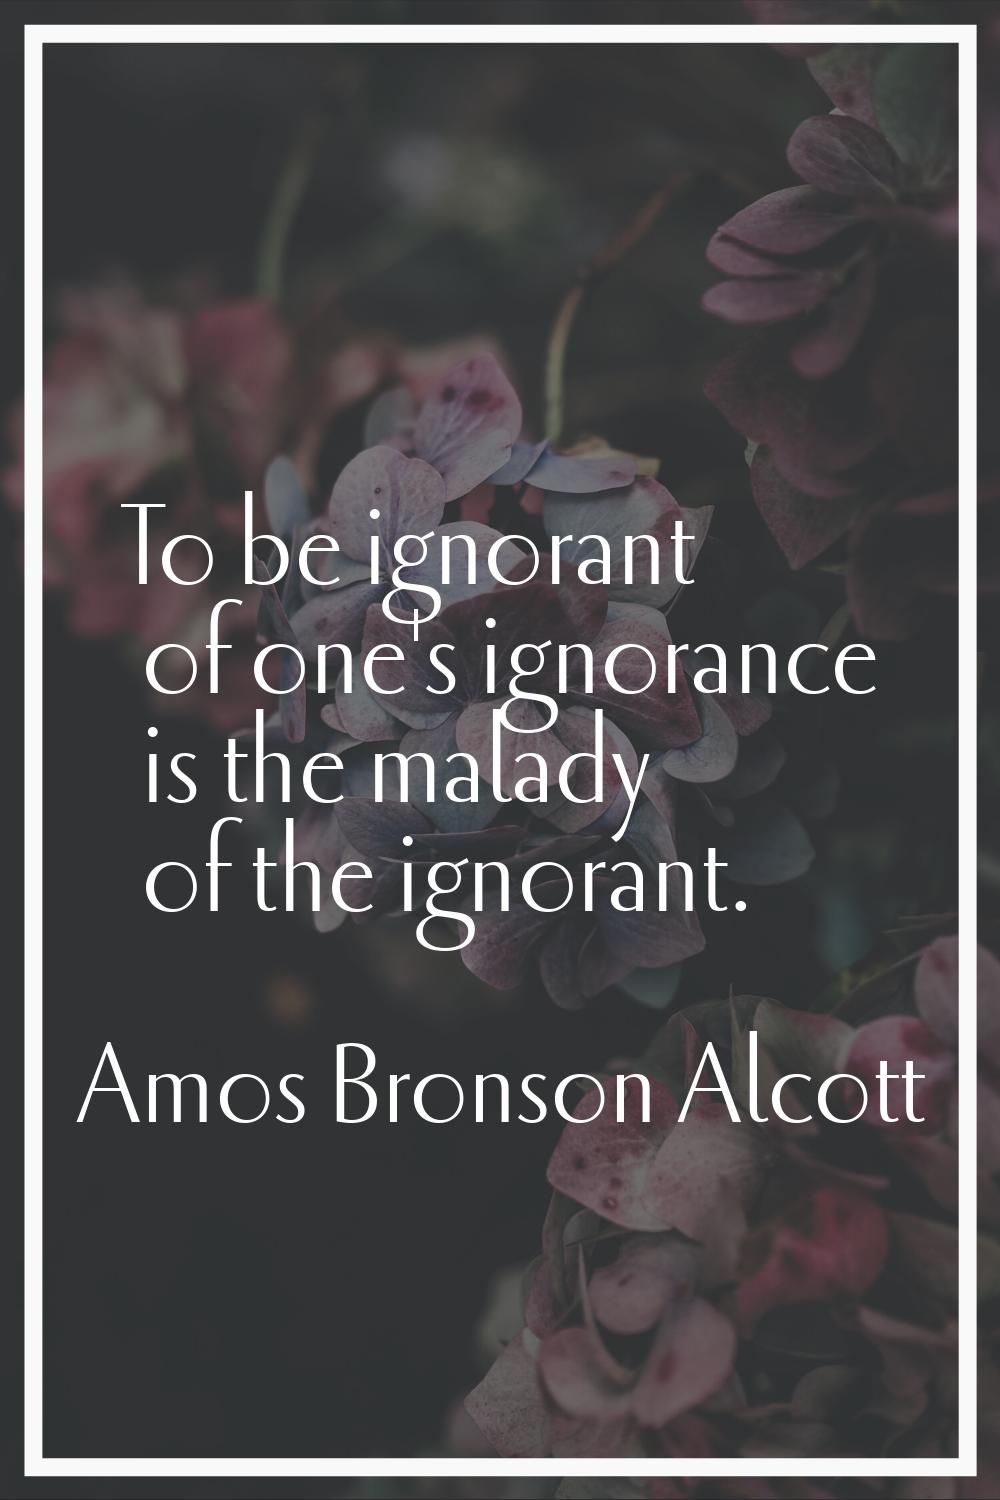 To be ignorant of one's ignorance is the malady of the ignorant.